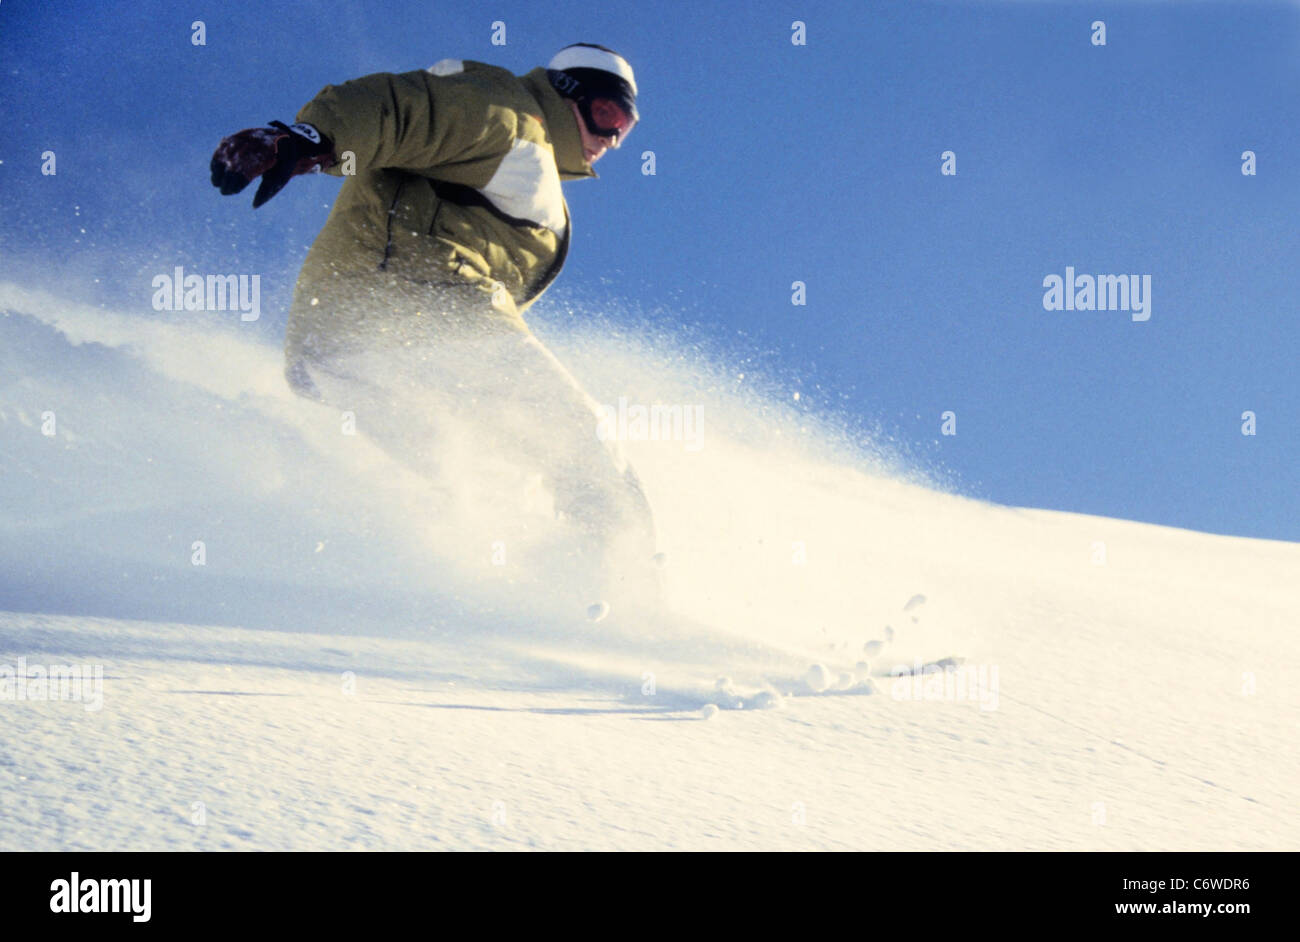 Snowboarding in the powder, les menuires, three valleys, france. Stock Photo